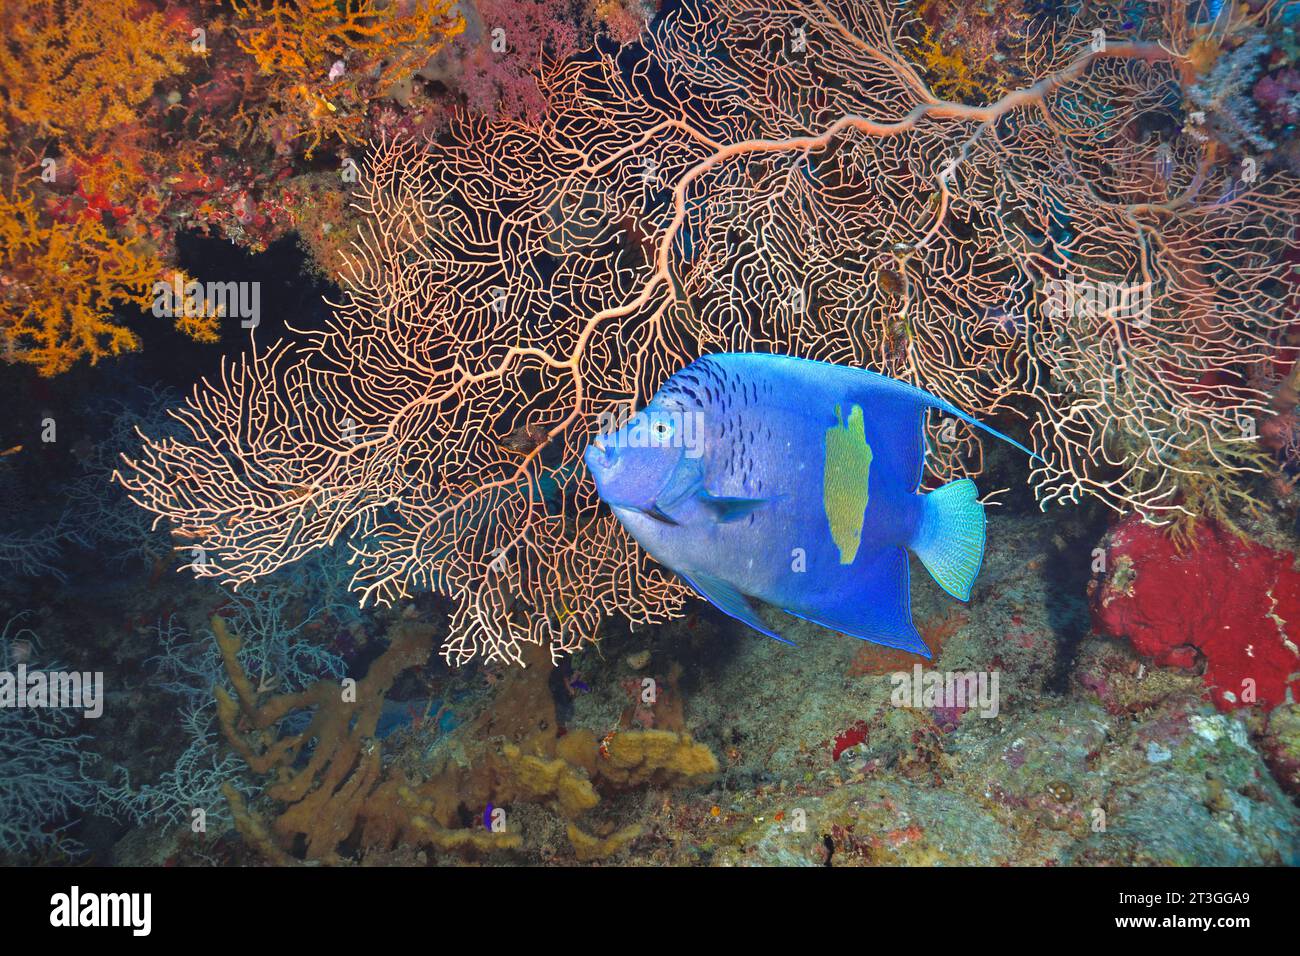 Egypt, Red Sea, a yellowbar angelfish (Pomacanthus maculosus) on a background of giant sea-fan coral (Annella mollis) Stock Photo